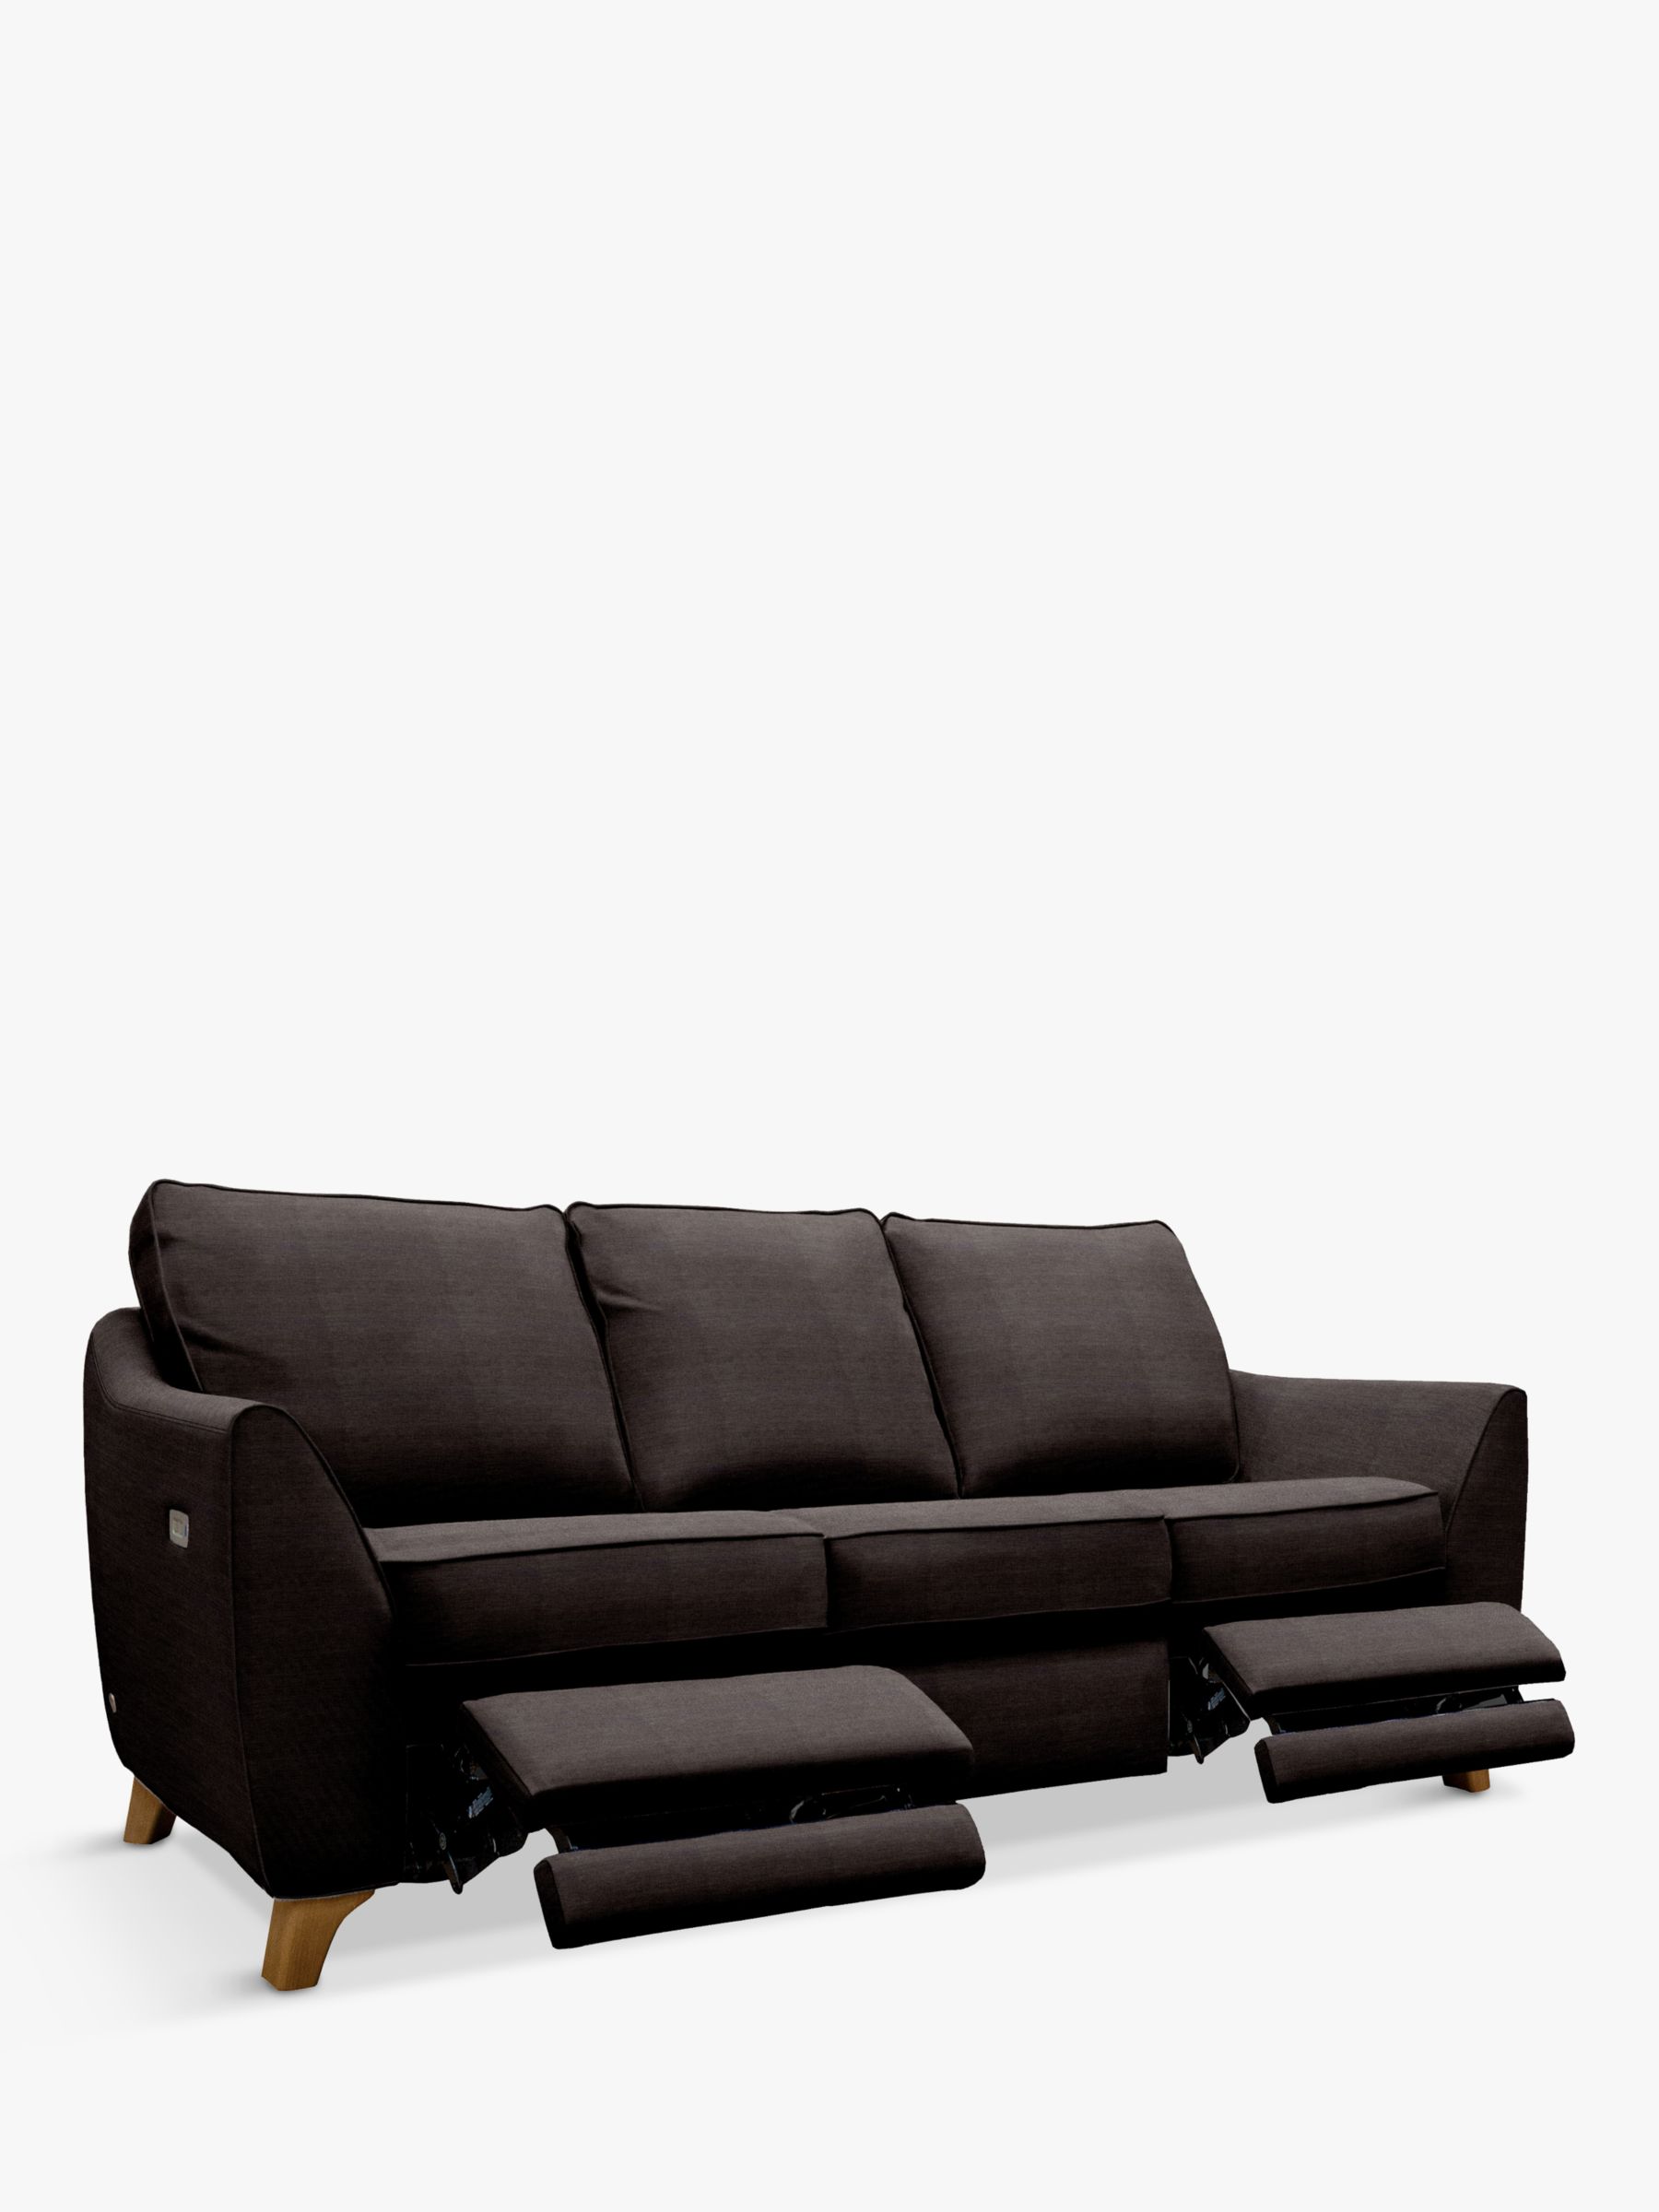 The Sixty Eight Range, G Plan Vintage The Sixty Eight Large 3 Seater Sofa with Double Footrest Mechanism, Tonic Charcoal